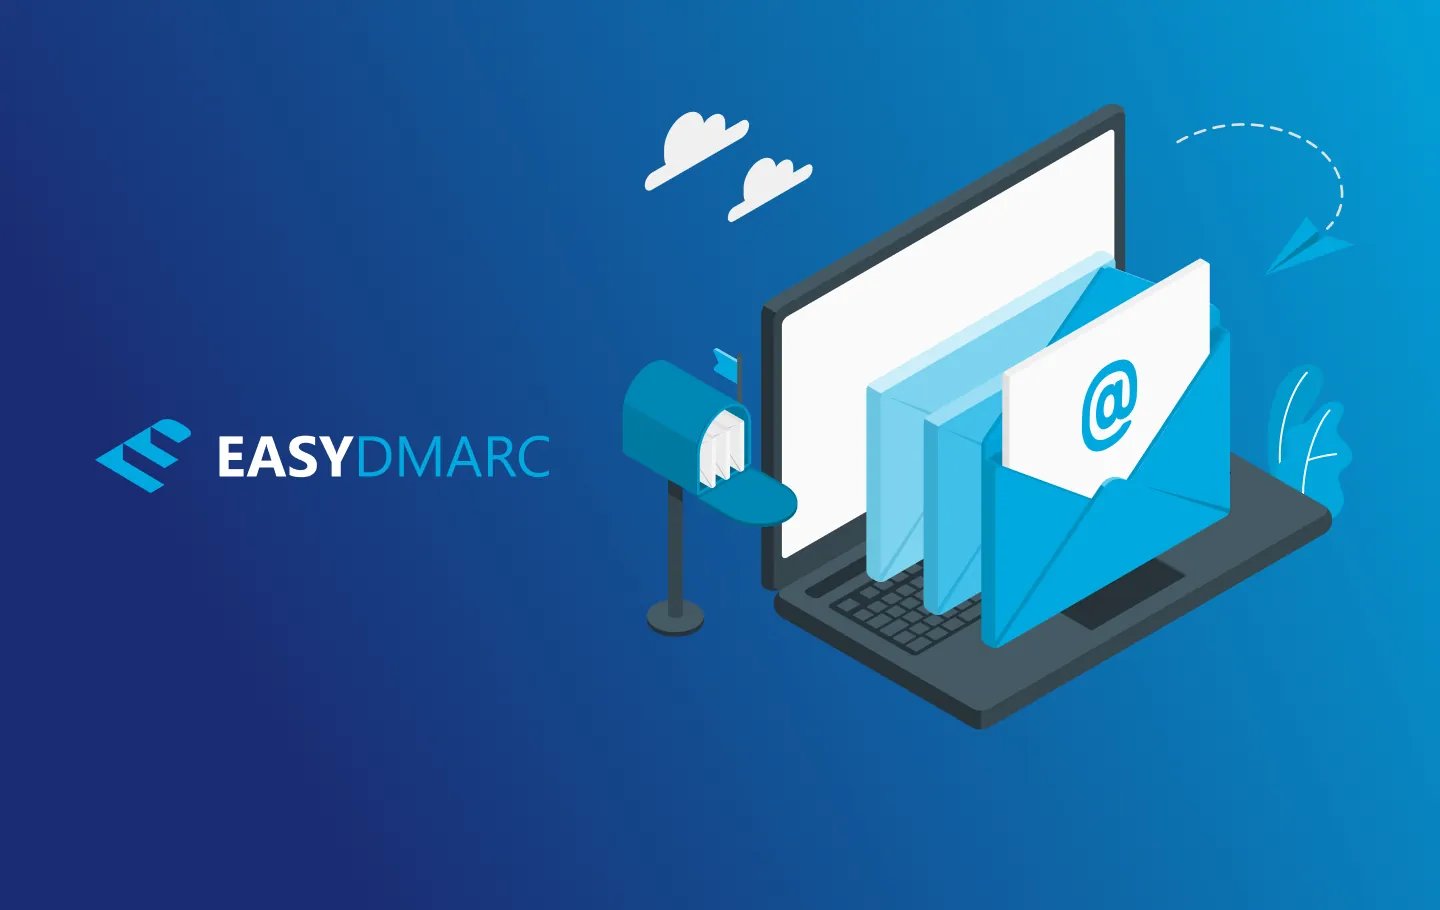 A laptop and letter images on a blue background, EasyDMARC logo on the right side